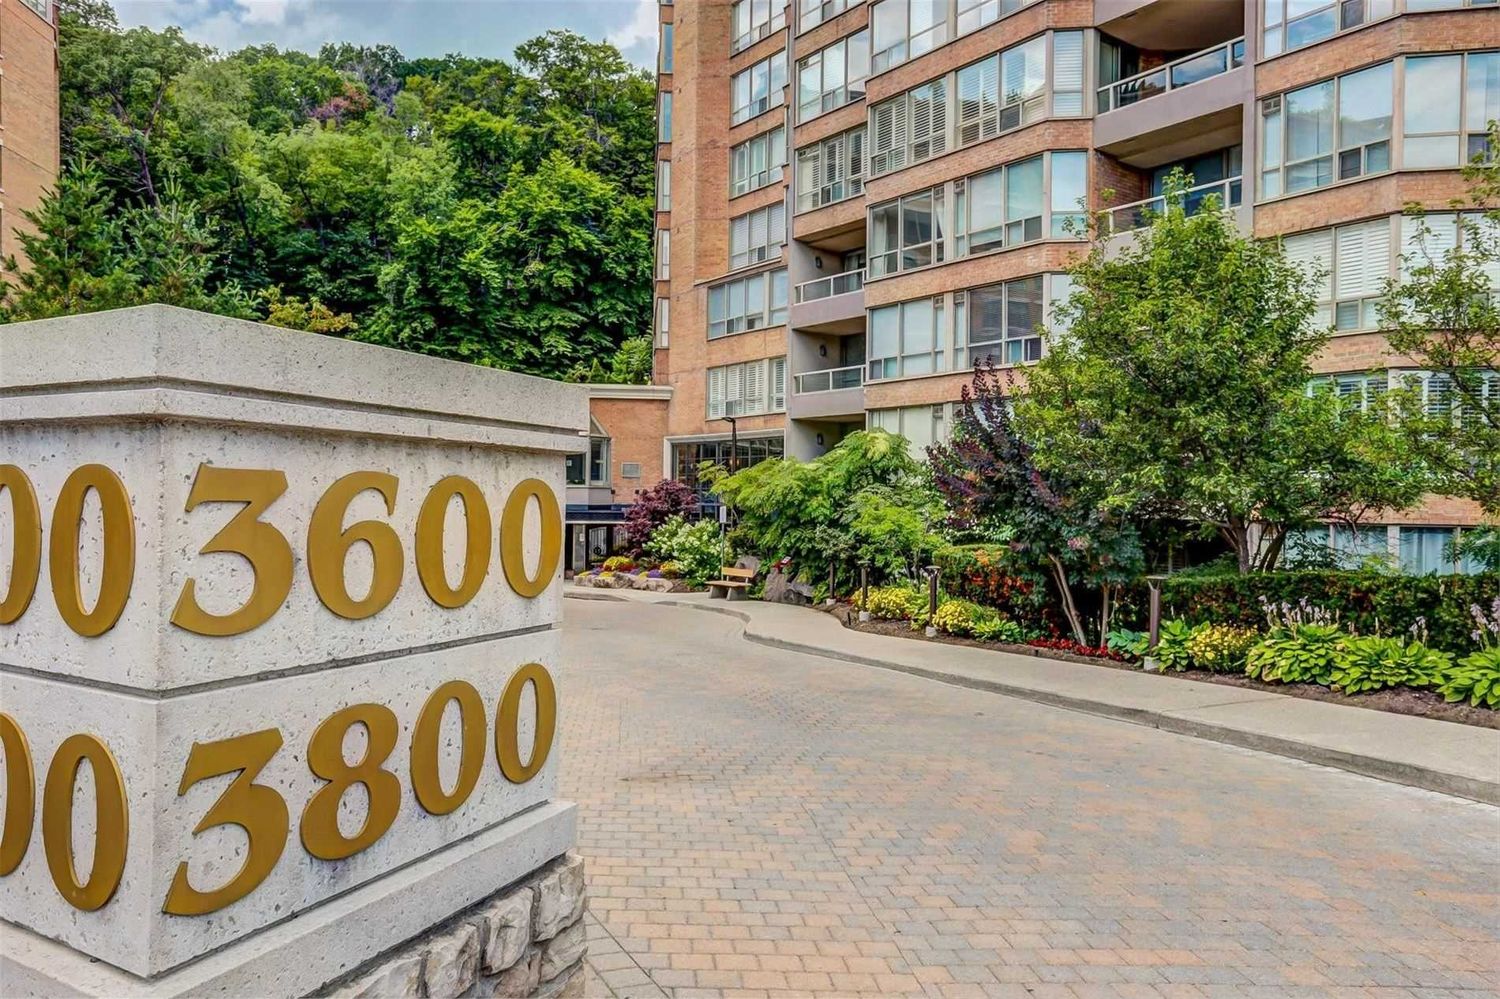 3800 Yonge Street. Governor's Hill I Condos is located in  North York, Toronto - image #3 of 3